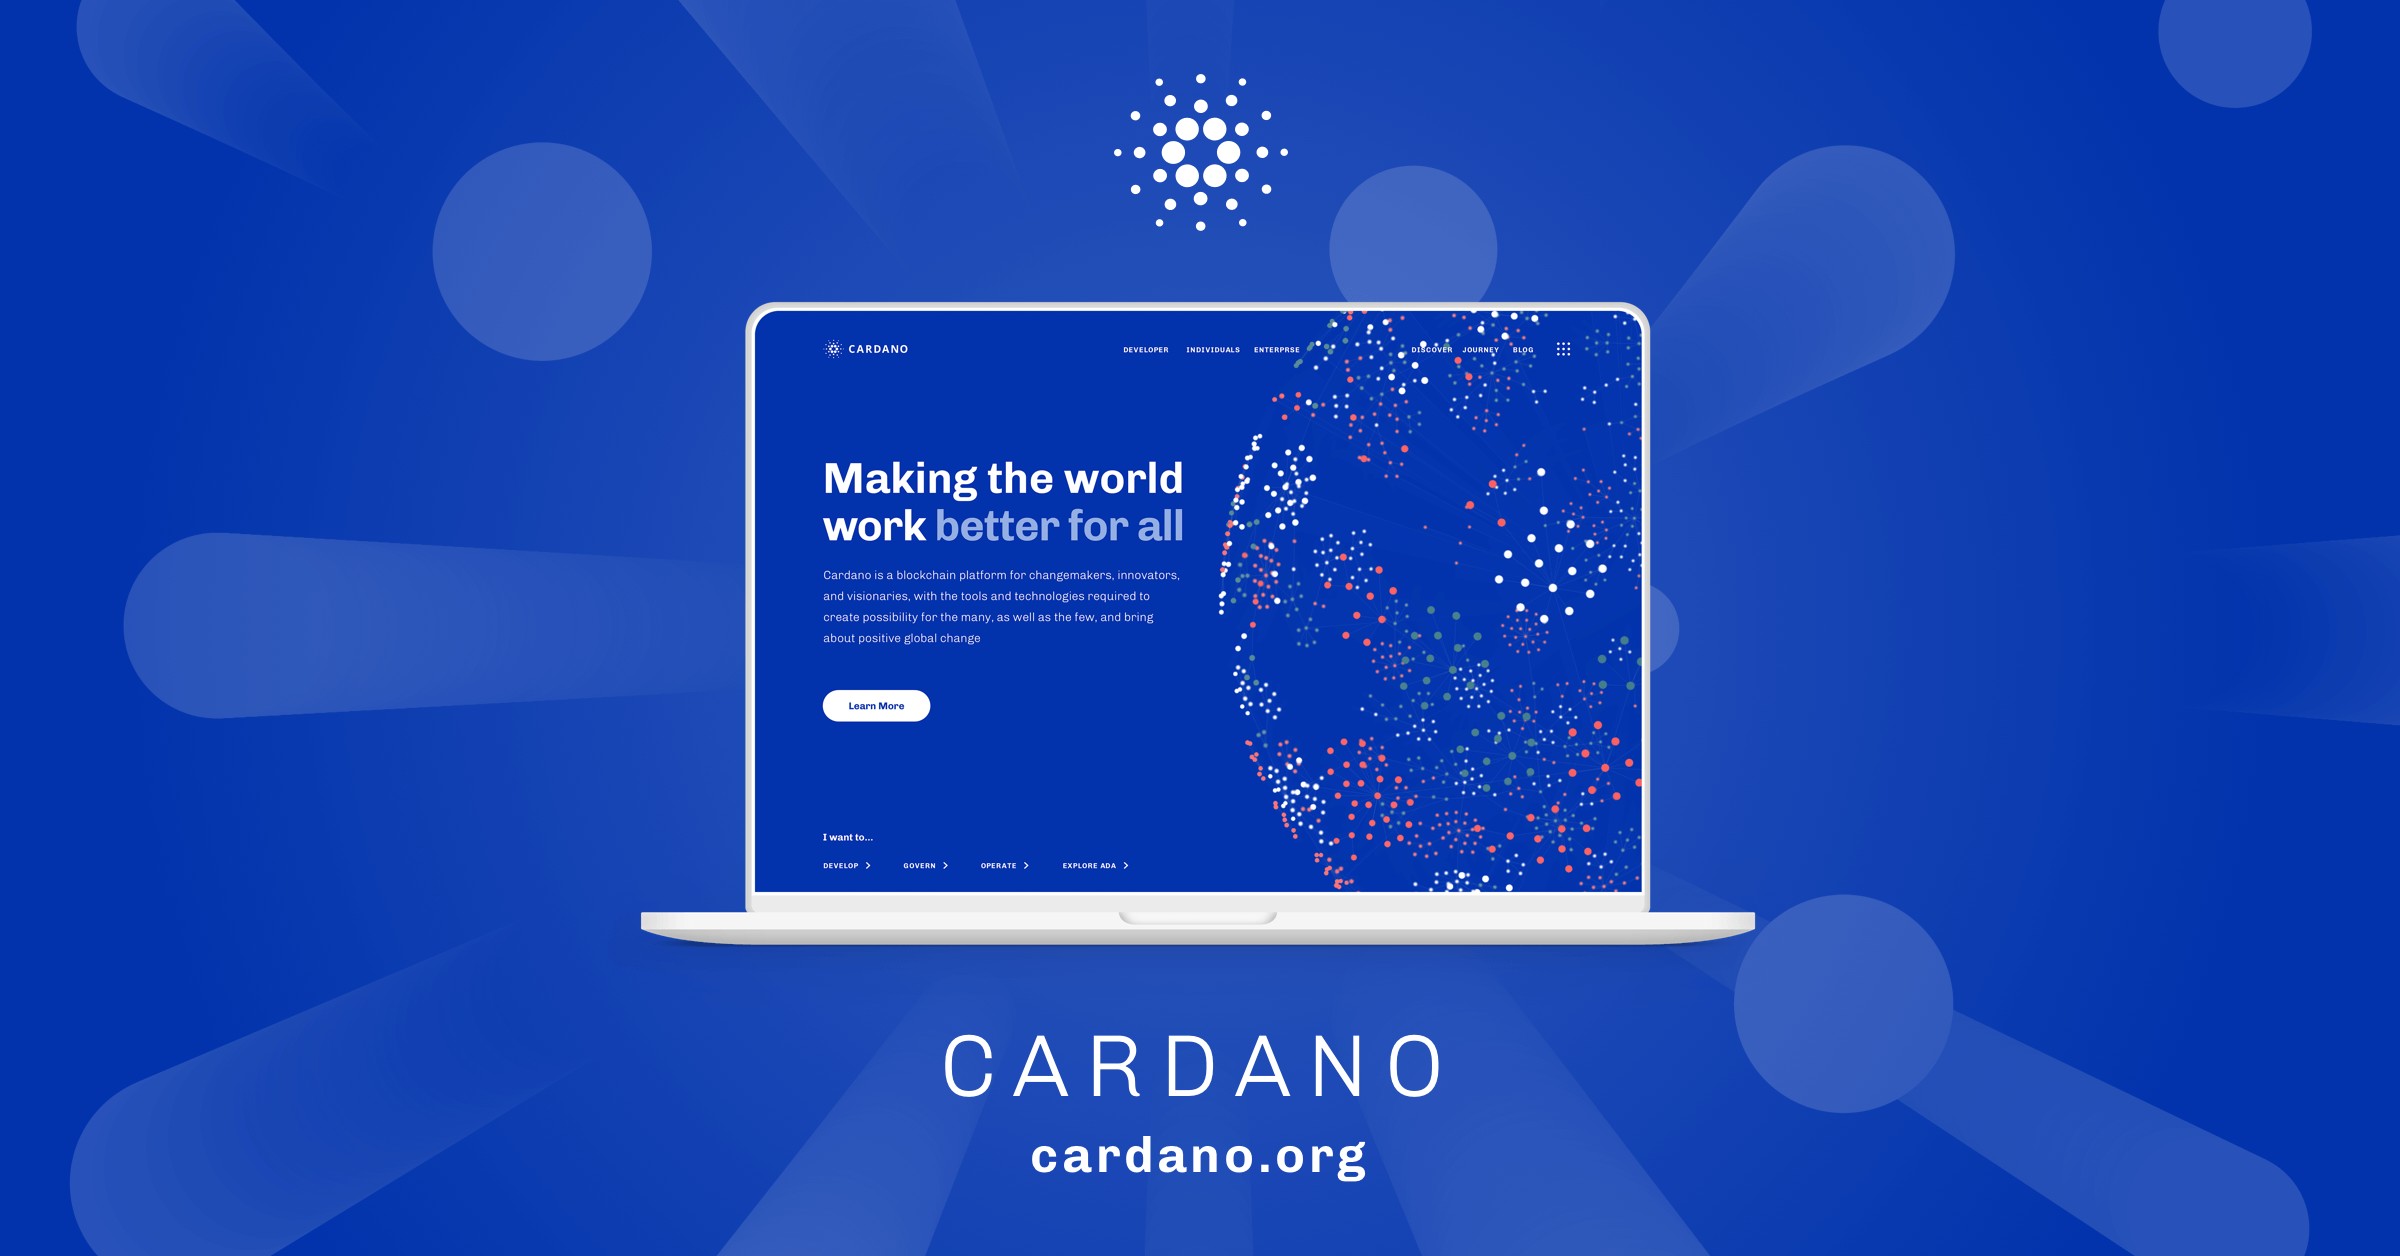 Is Cardano a security 